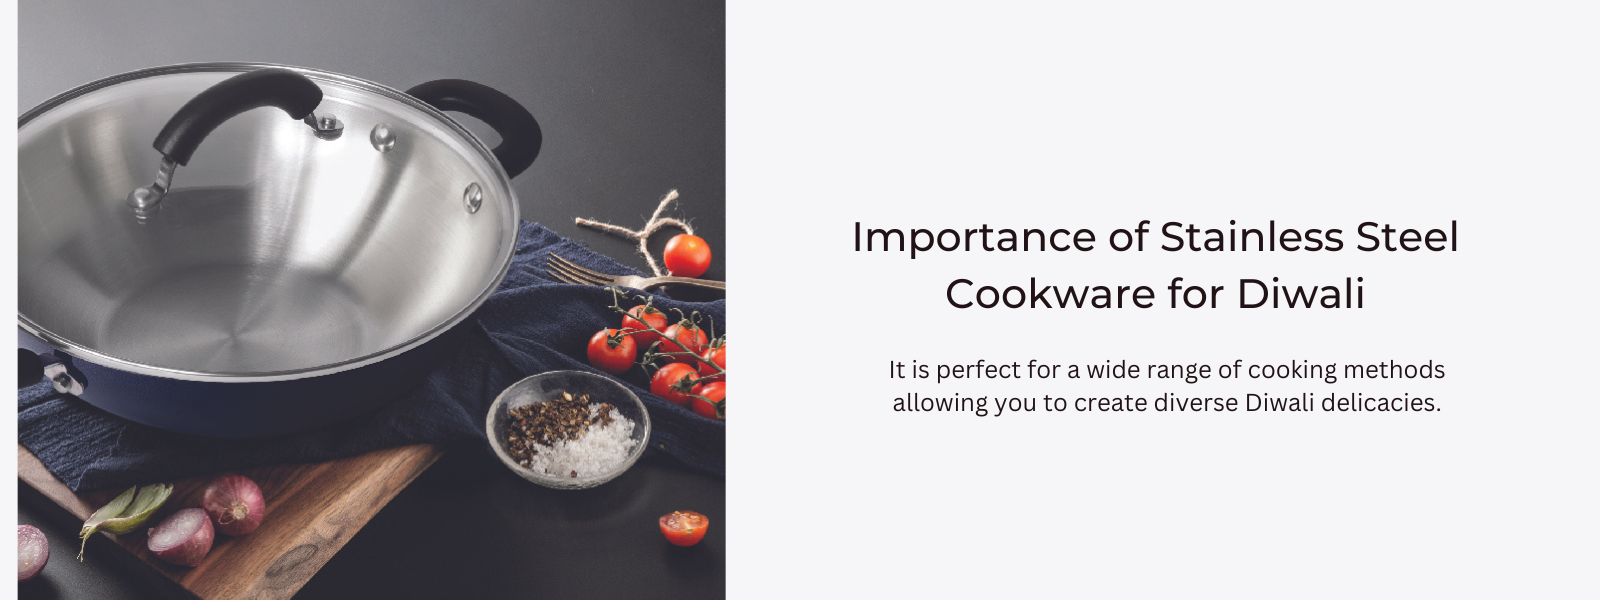 Why Every Kitchen Needs Stainless Steel Cookware for Diwali?